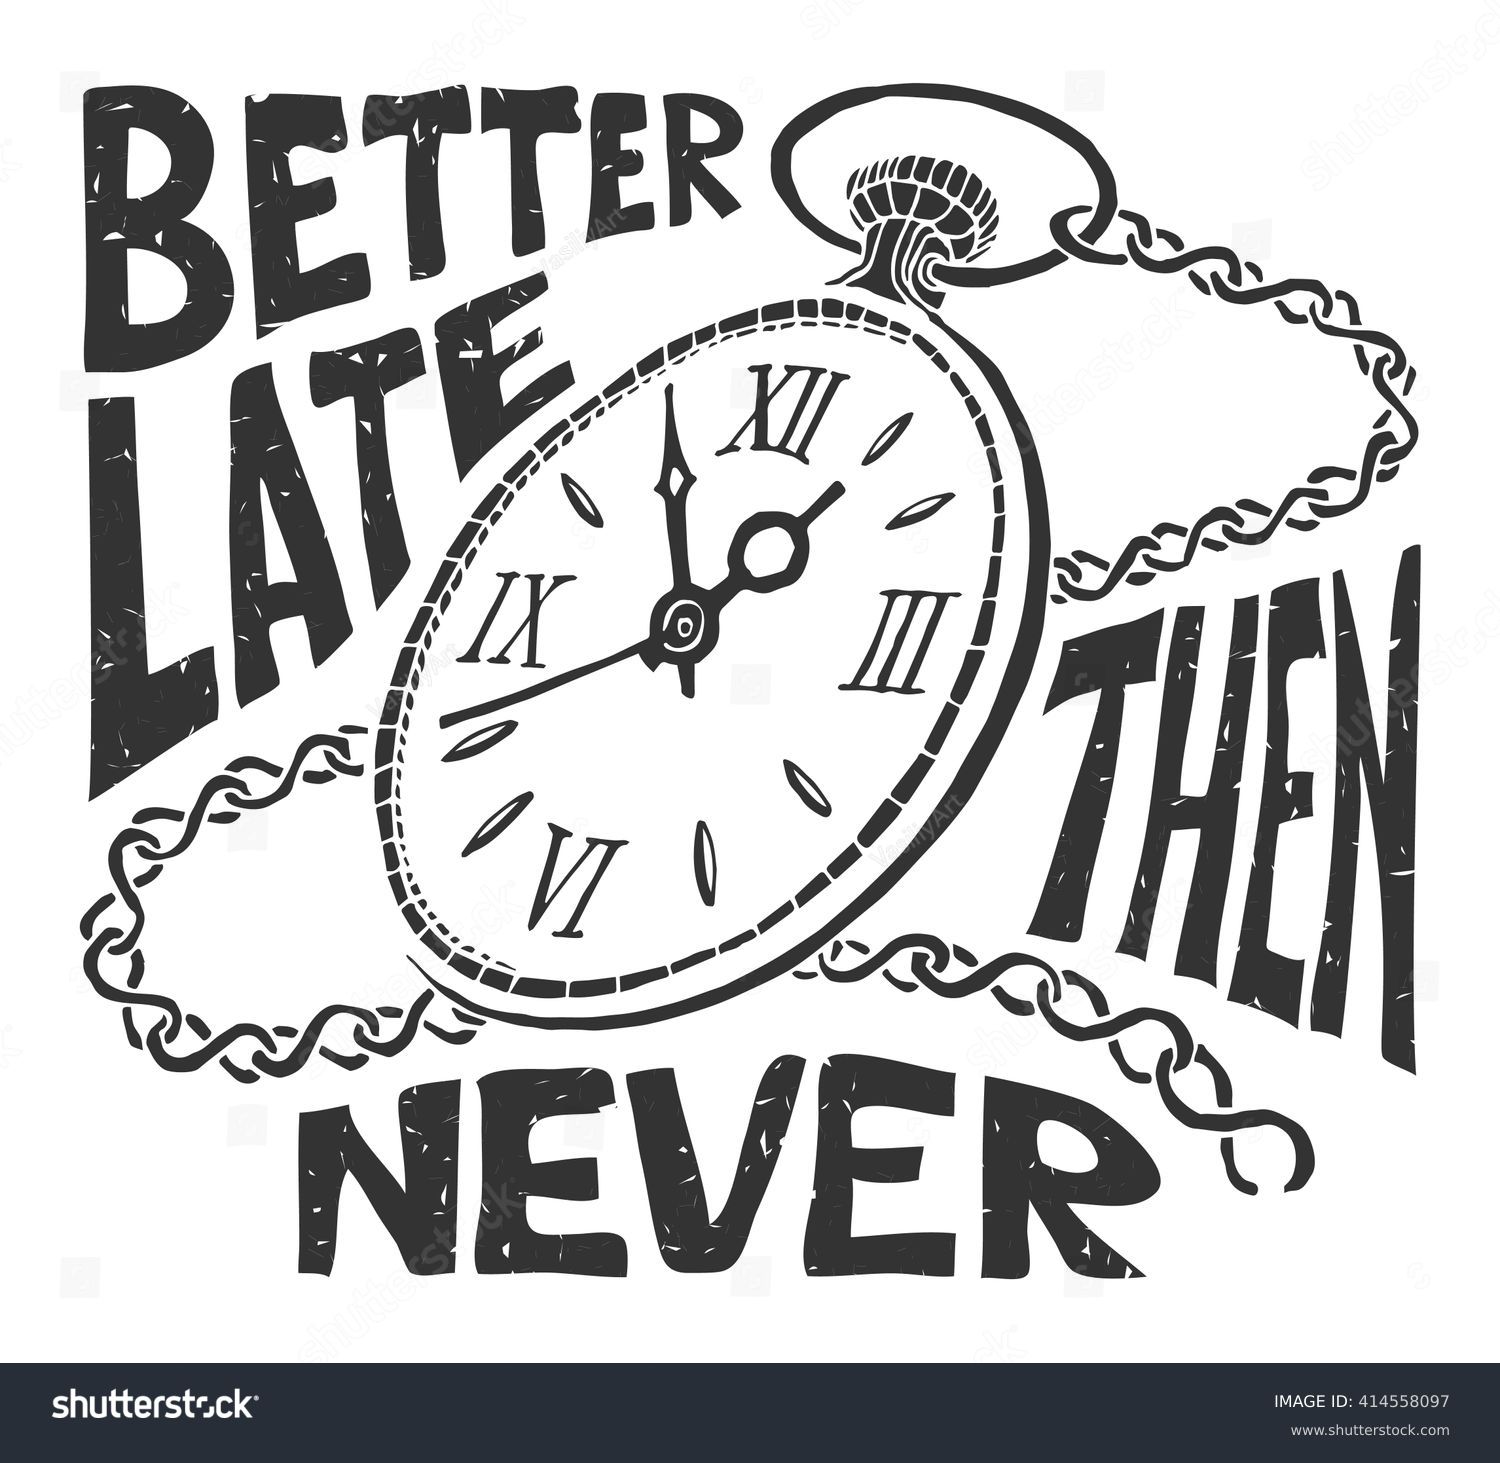 510 Better Late Than Never Stock Vectors Images And Vector Art Shutterstock